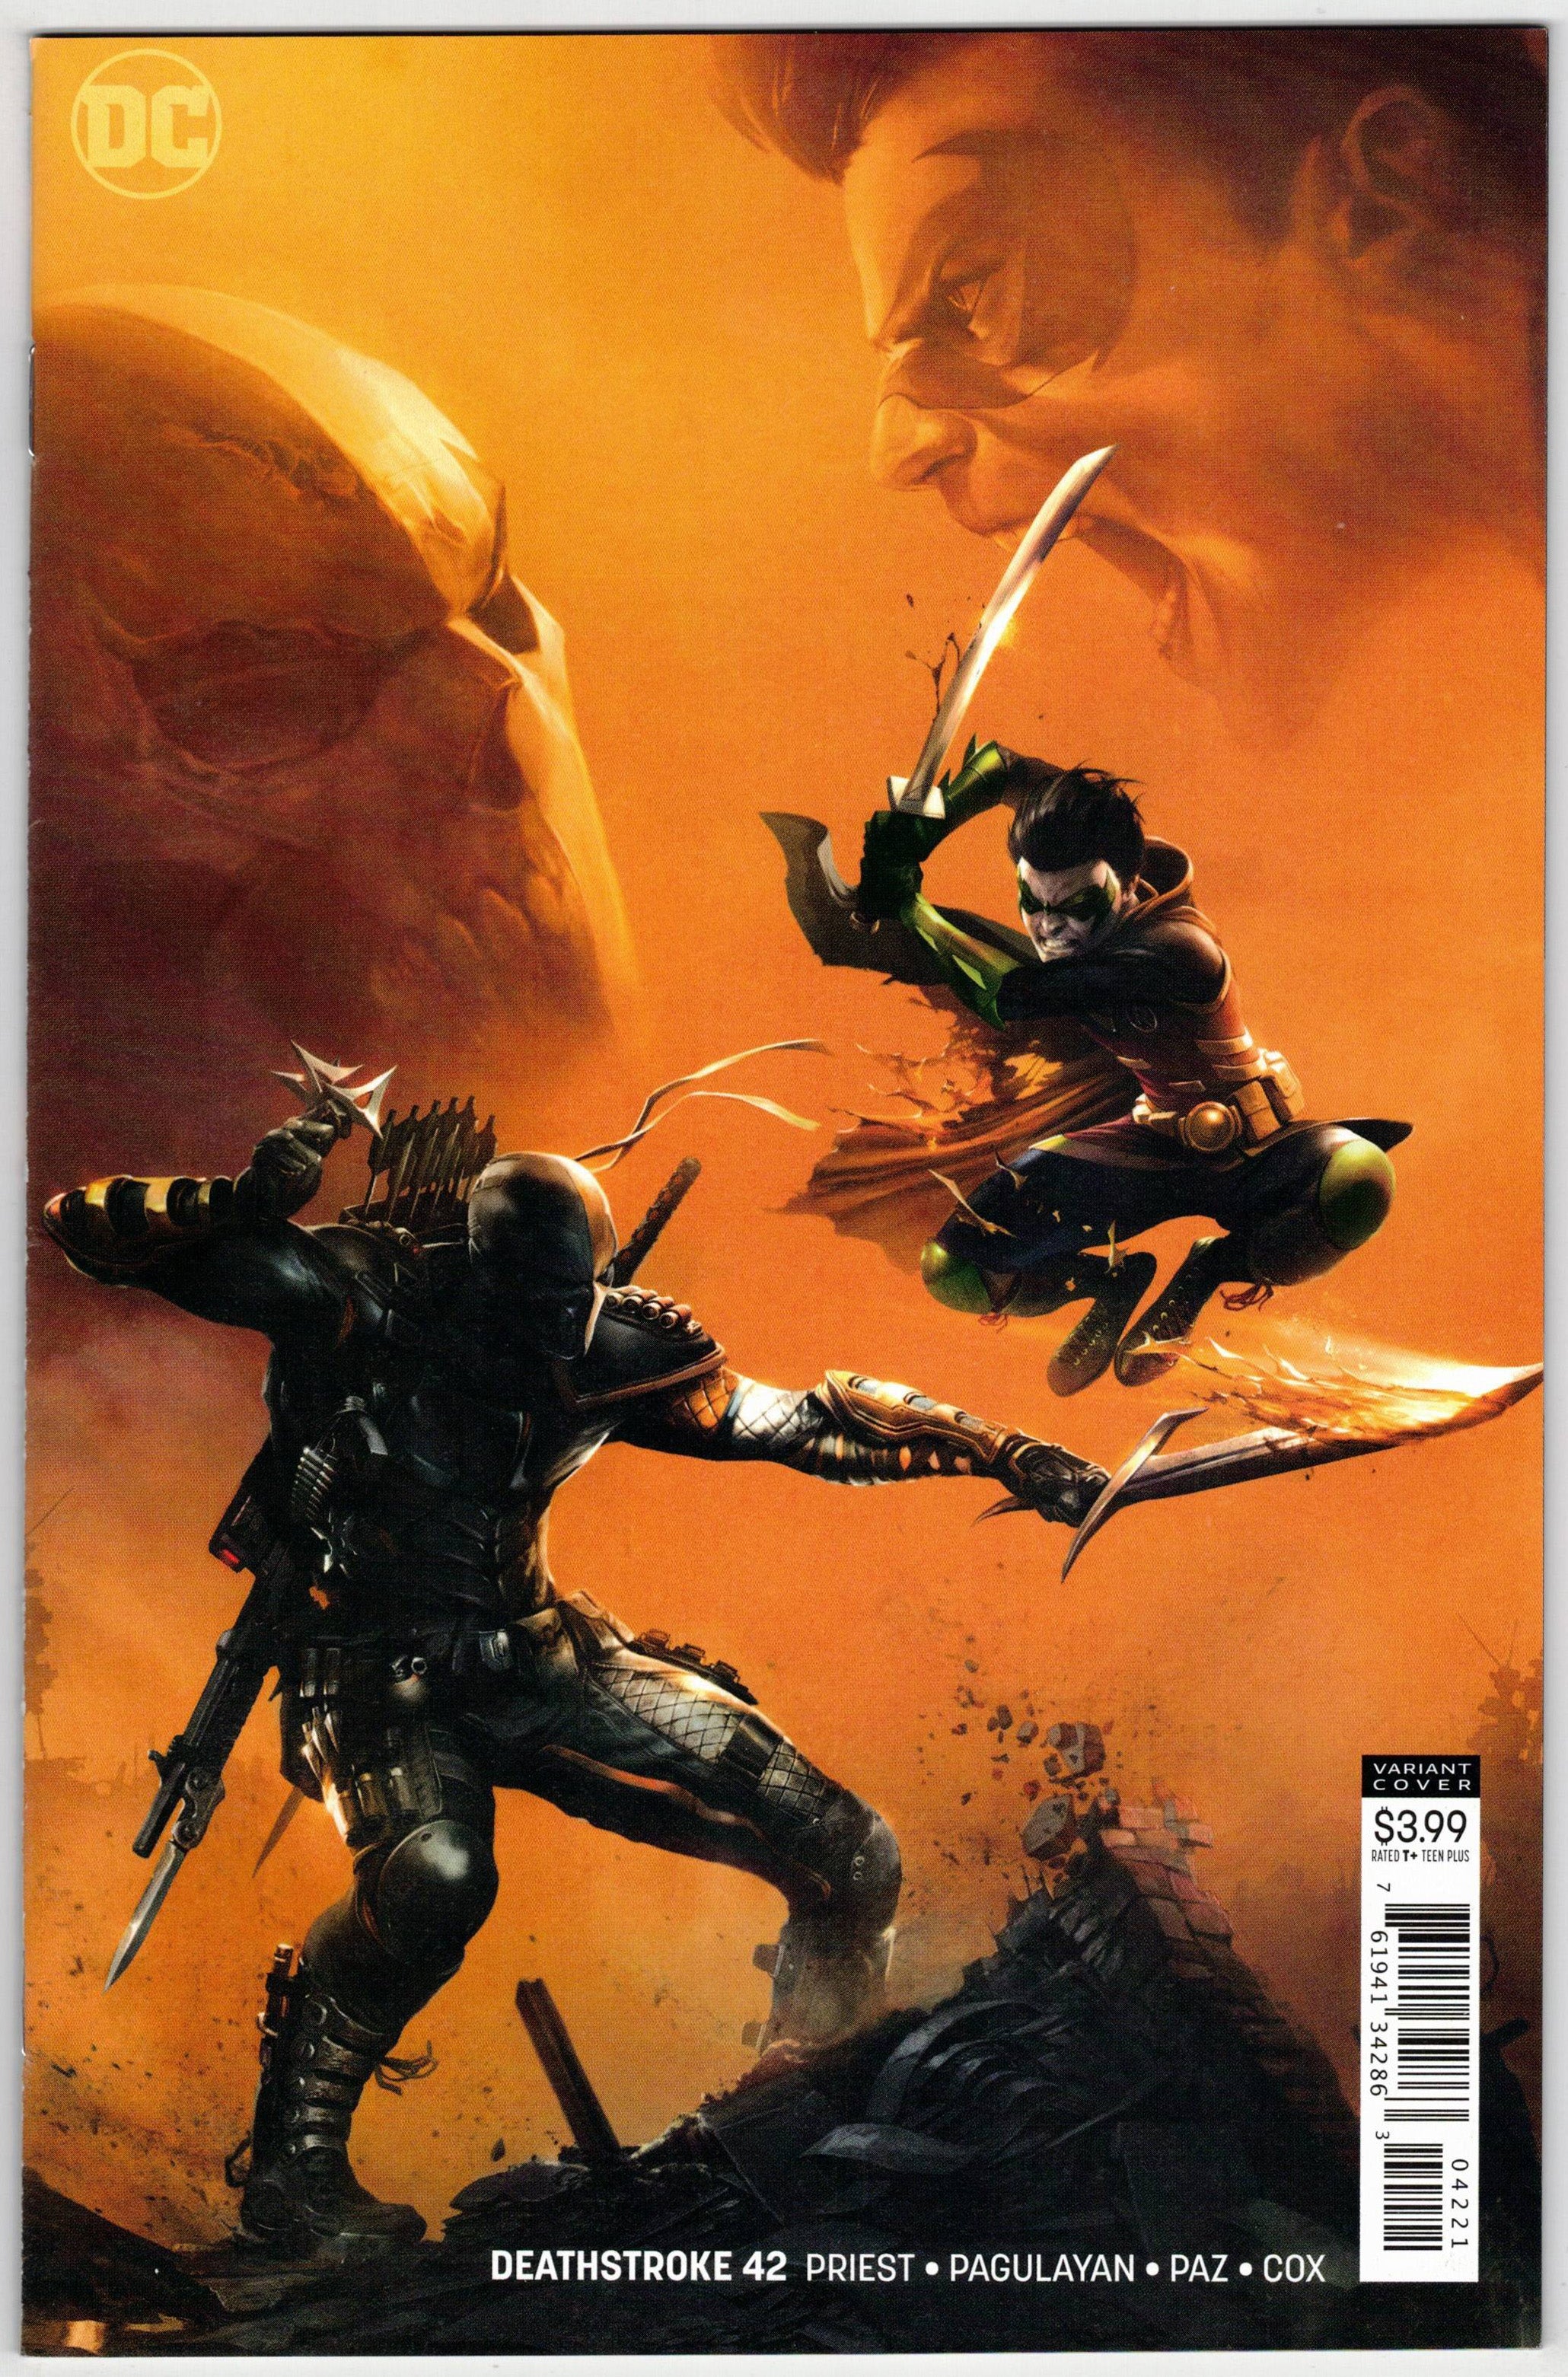 Photo of Deathstroke, Vol. 4 (2019) Issue 42B - Near Mint Comic sold by Stronghold Collectibles